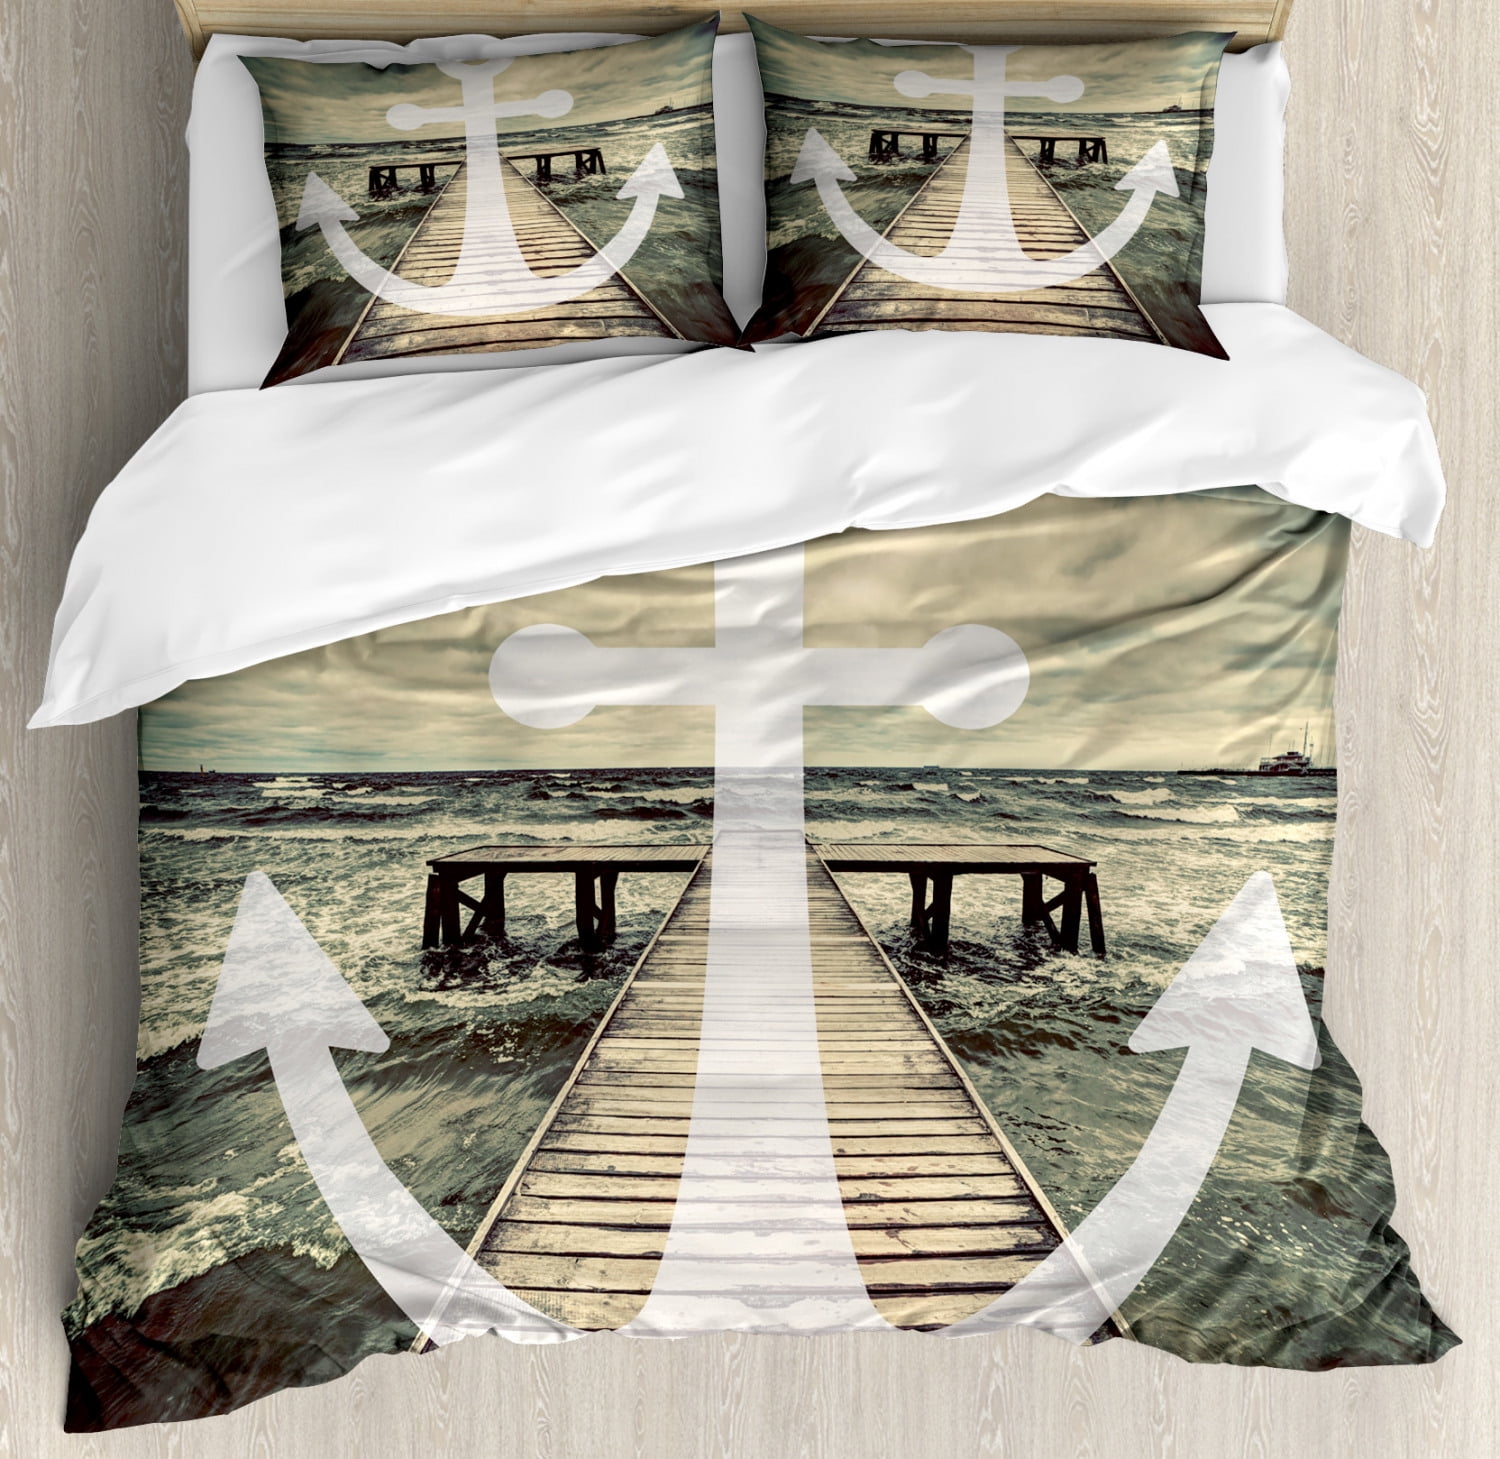 Nautical Duvet Cover Set Anchor Print In Ocean Waves With Long